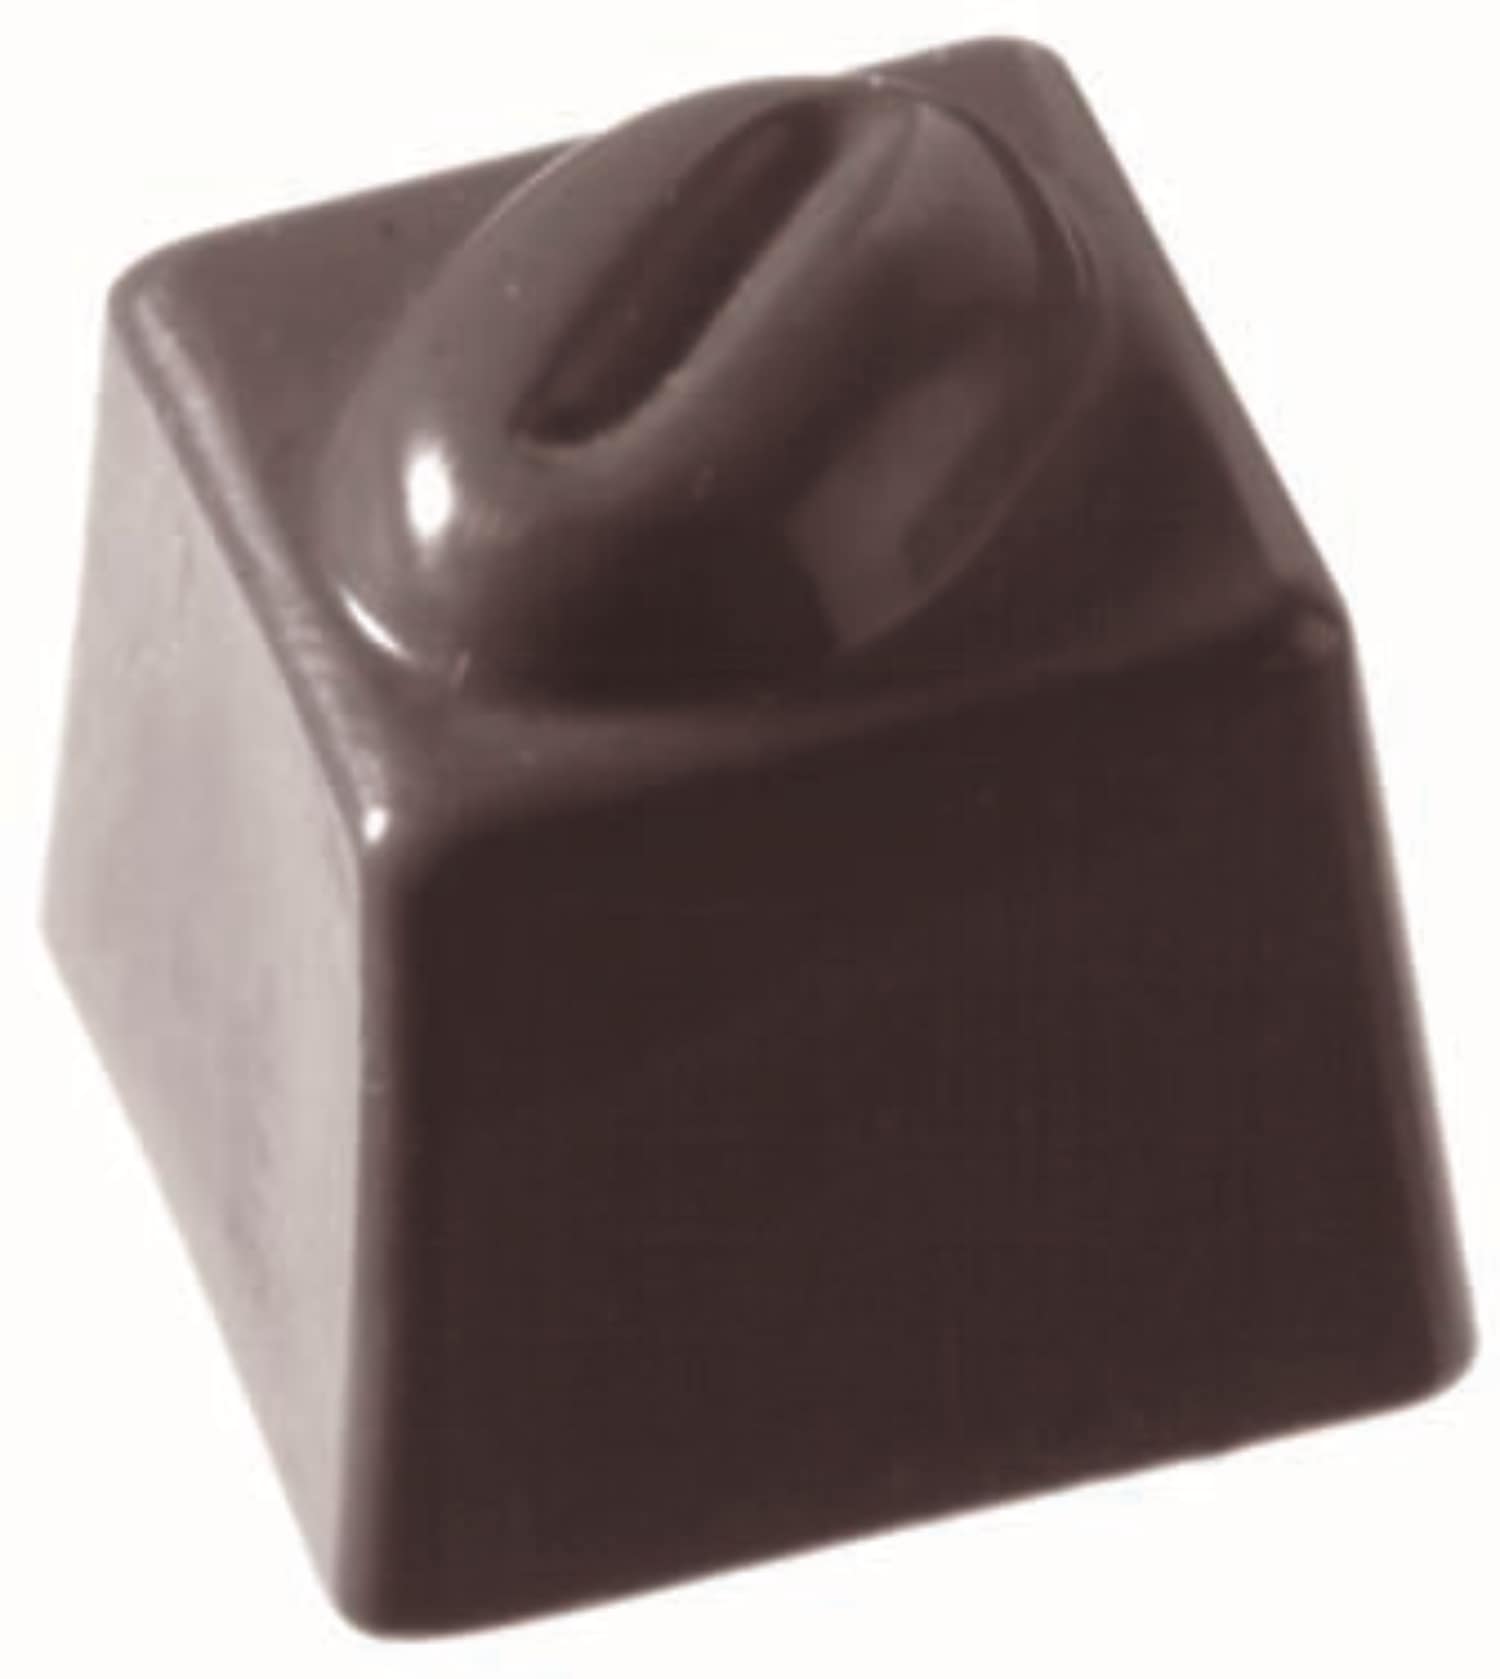 Chocolate mould "Coffee bean" 421019